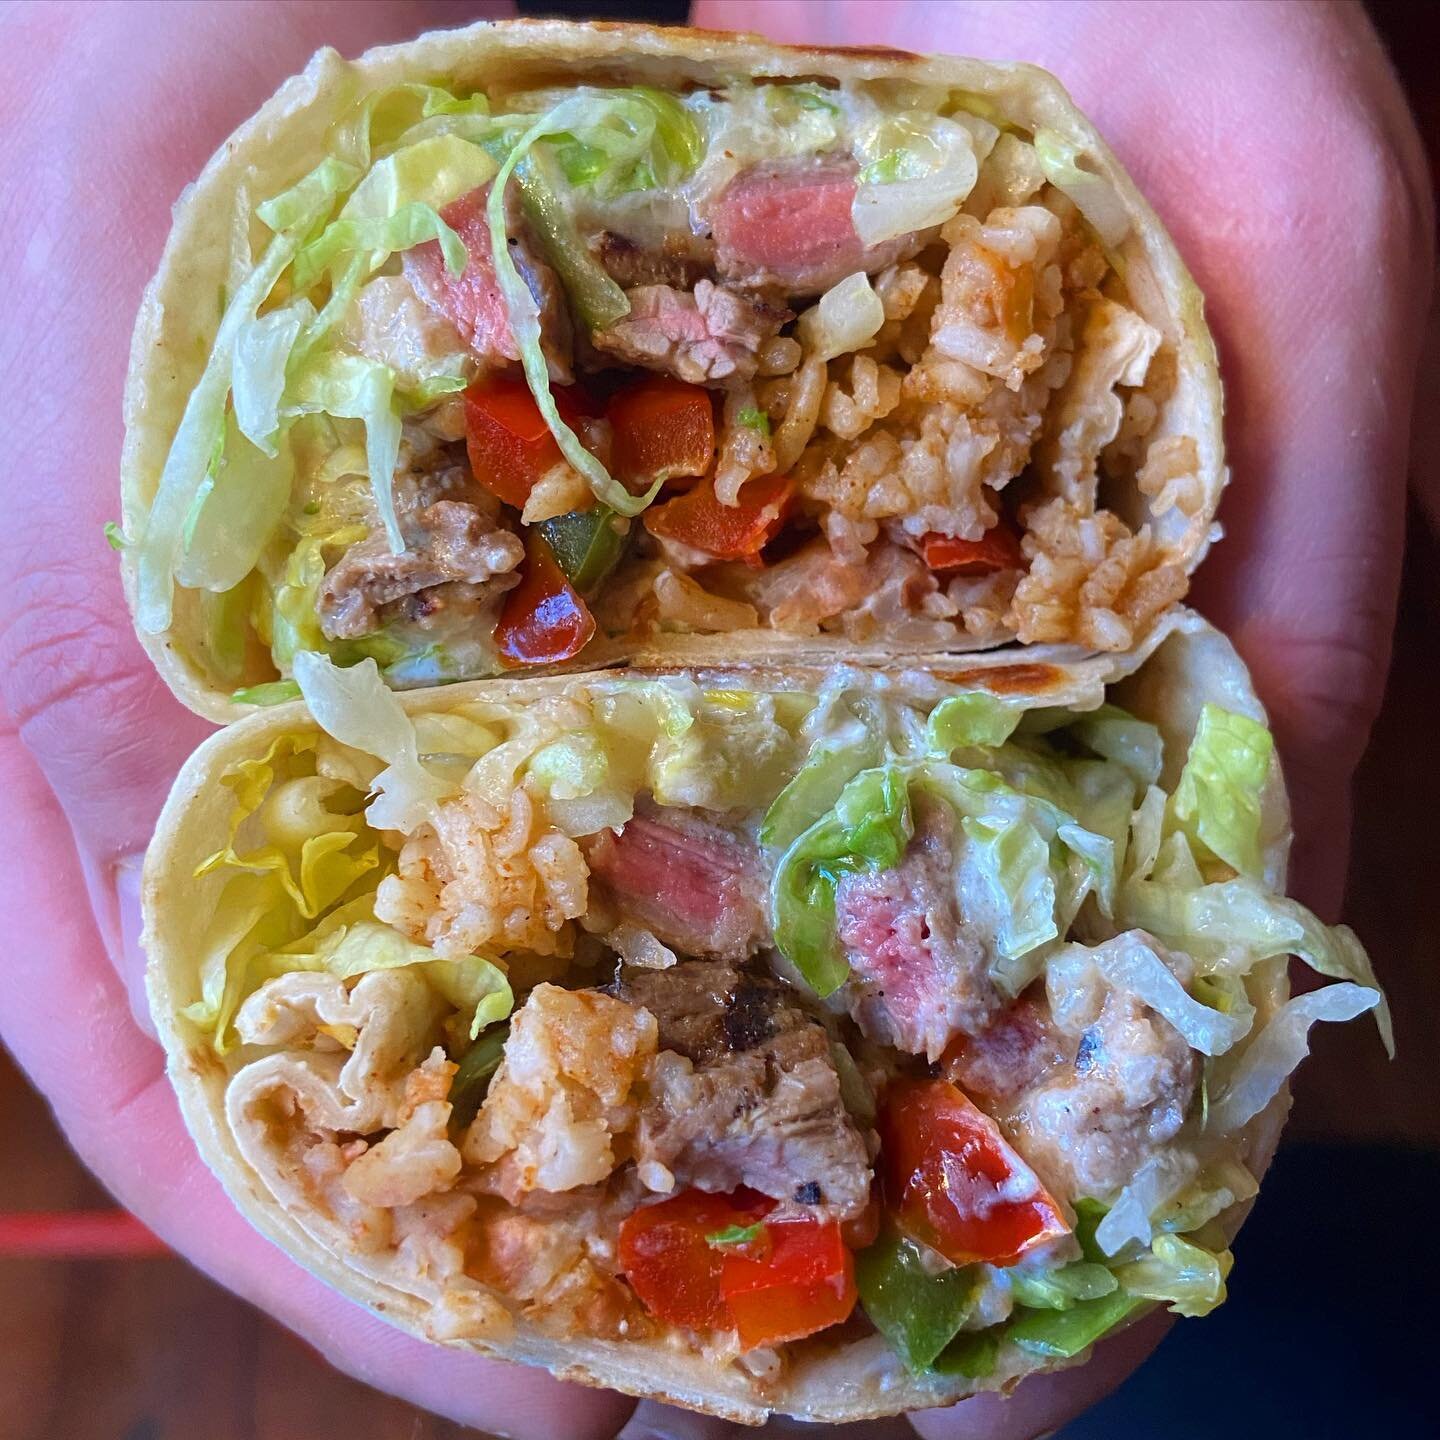 ** SOLD OUT** 🌯FEATURE BURRITO 🌯 

STEAK FAJITAS BURRITO
Grilled steak, sautéed peppers and onions, house hot sauce, sour cream, salsa, lettuce, mozzarella, rice and beans! 

The perfect combination of fajita and burrito. 😋

Available now as our 